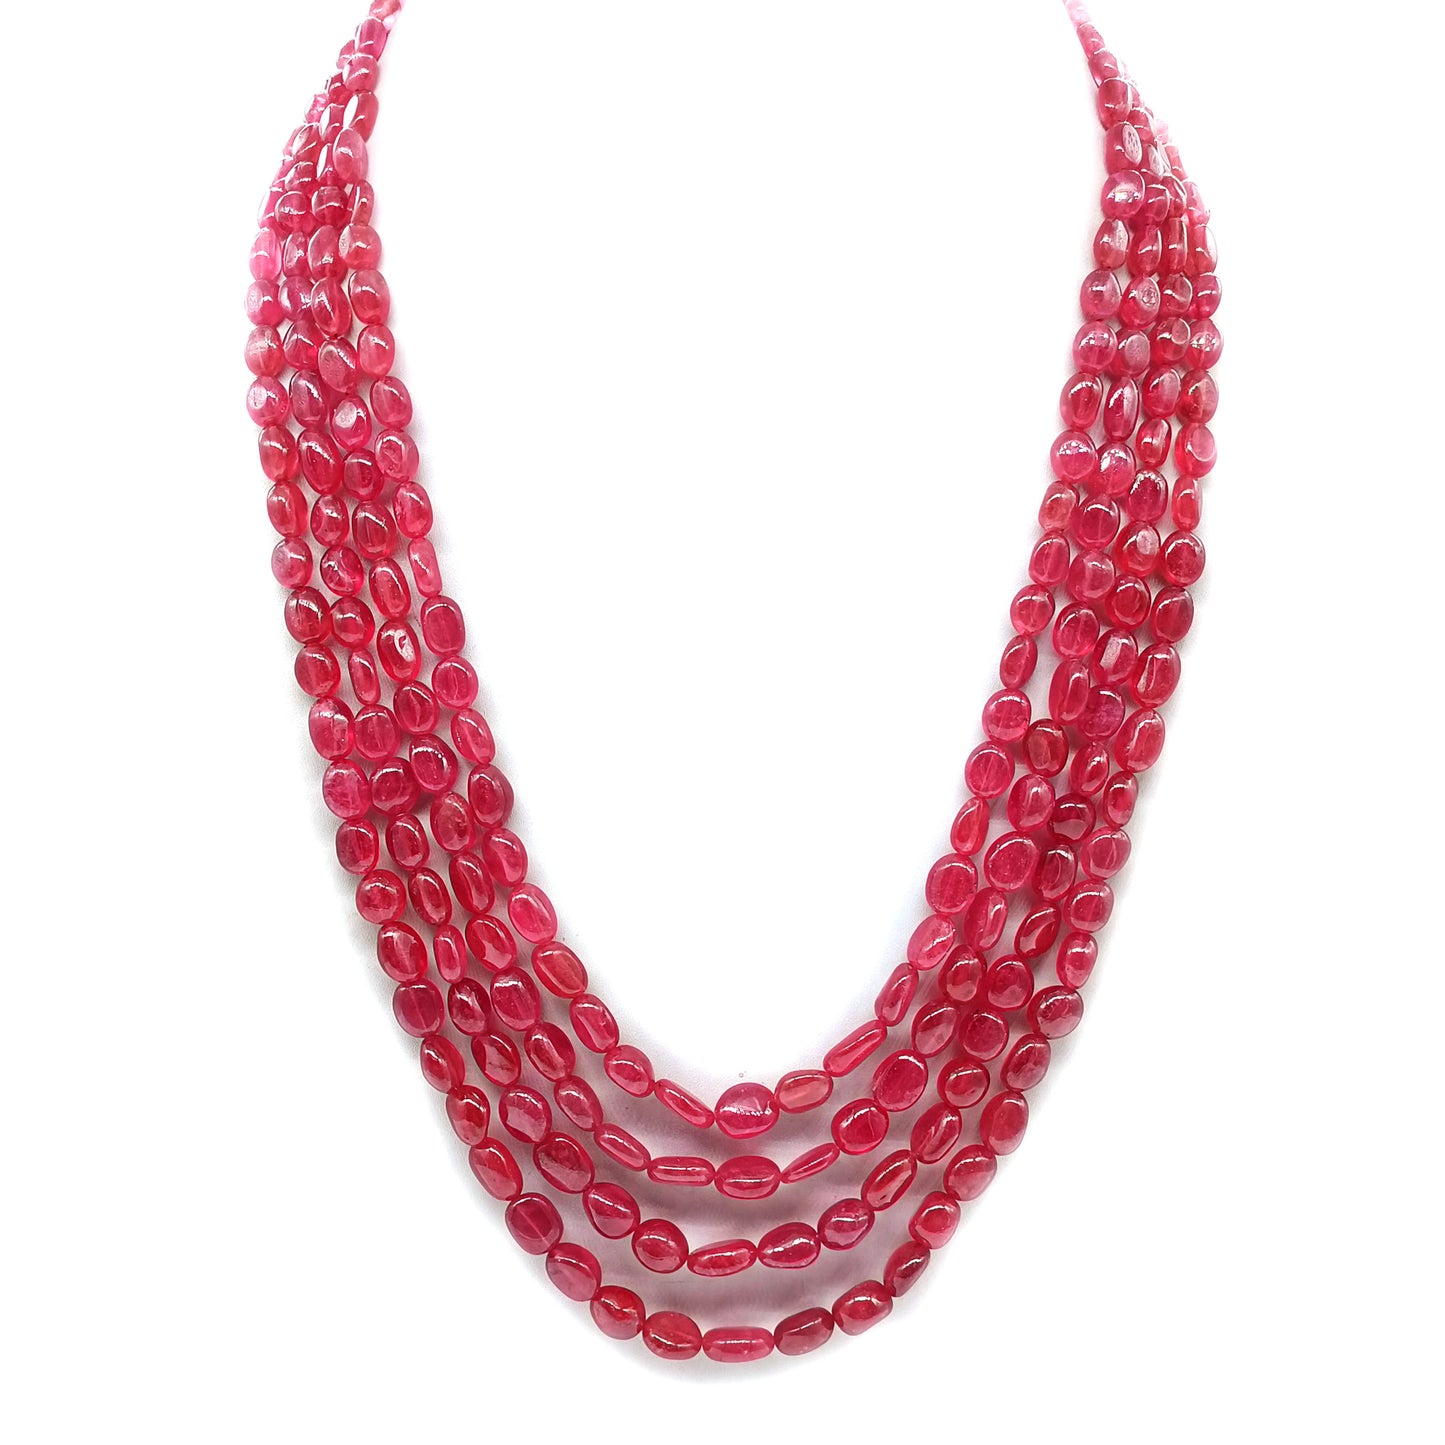 Natural Ruby Oval Gemstone Beads Necklace